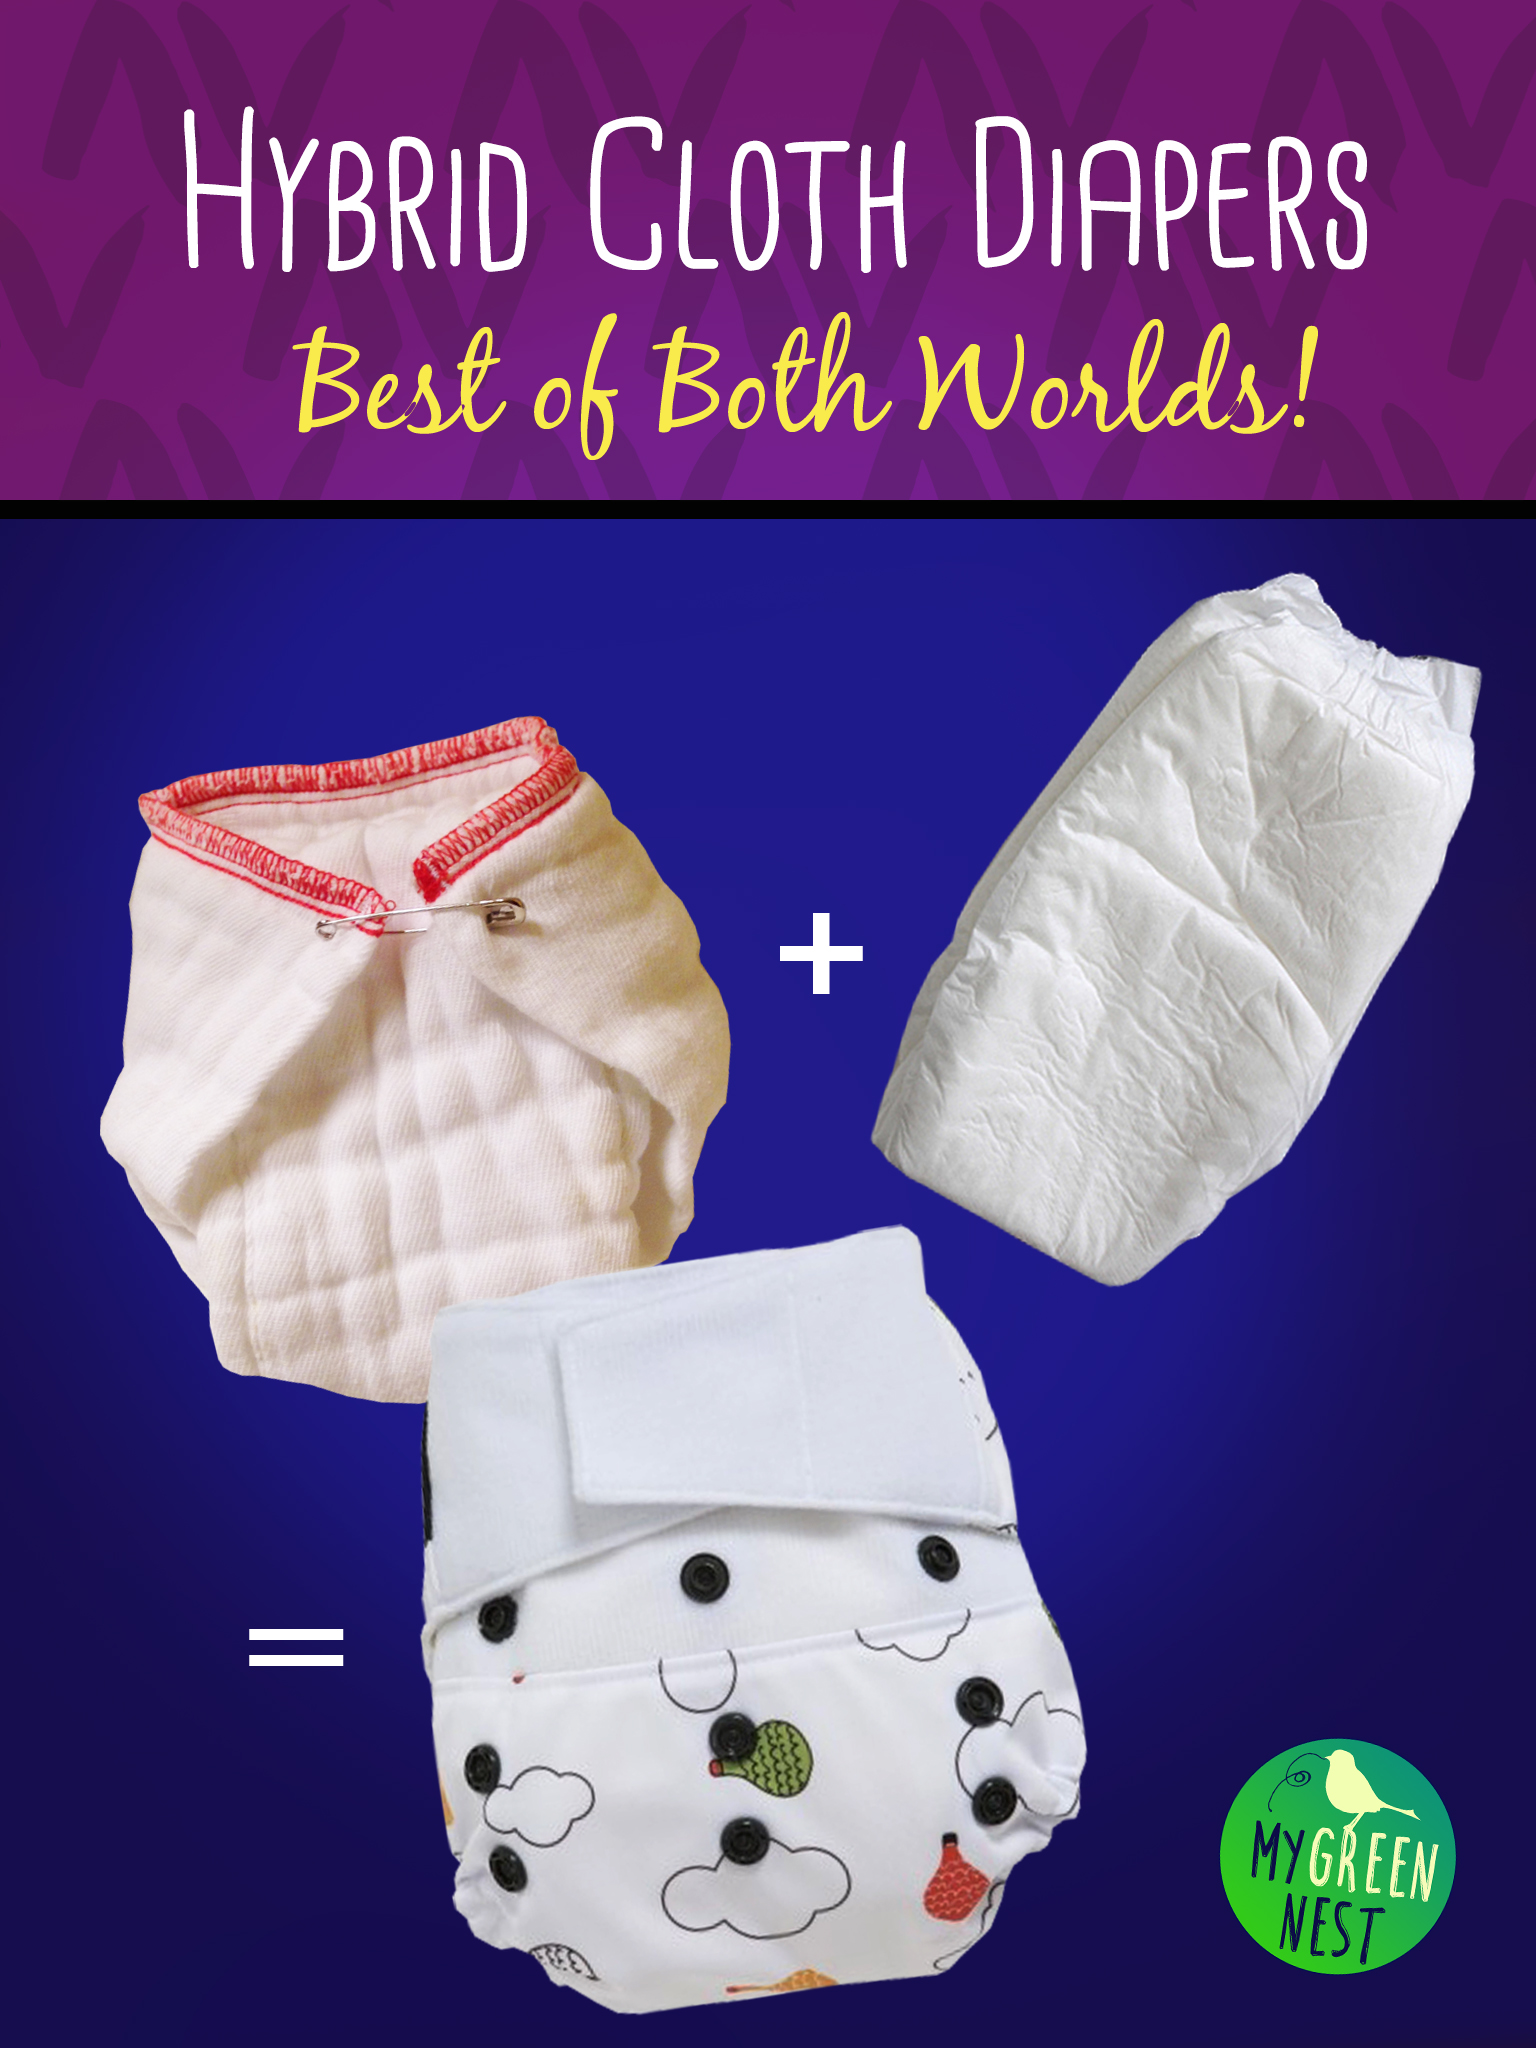 hybrid cloth diapers